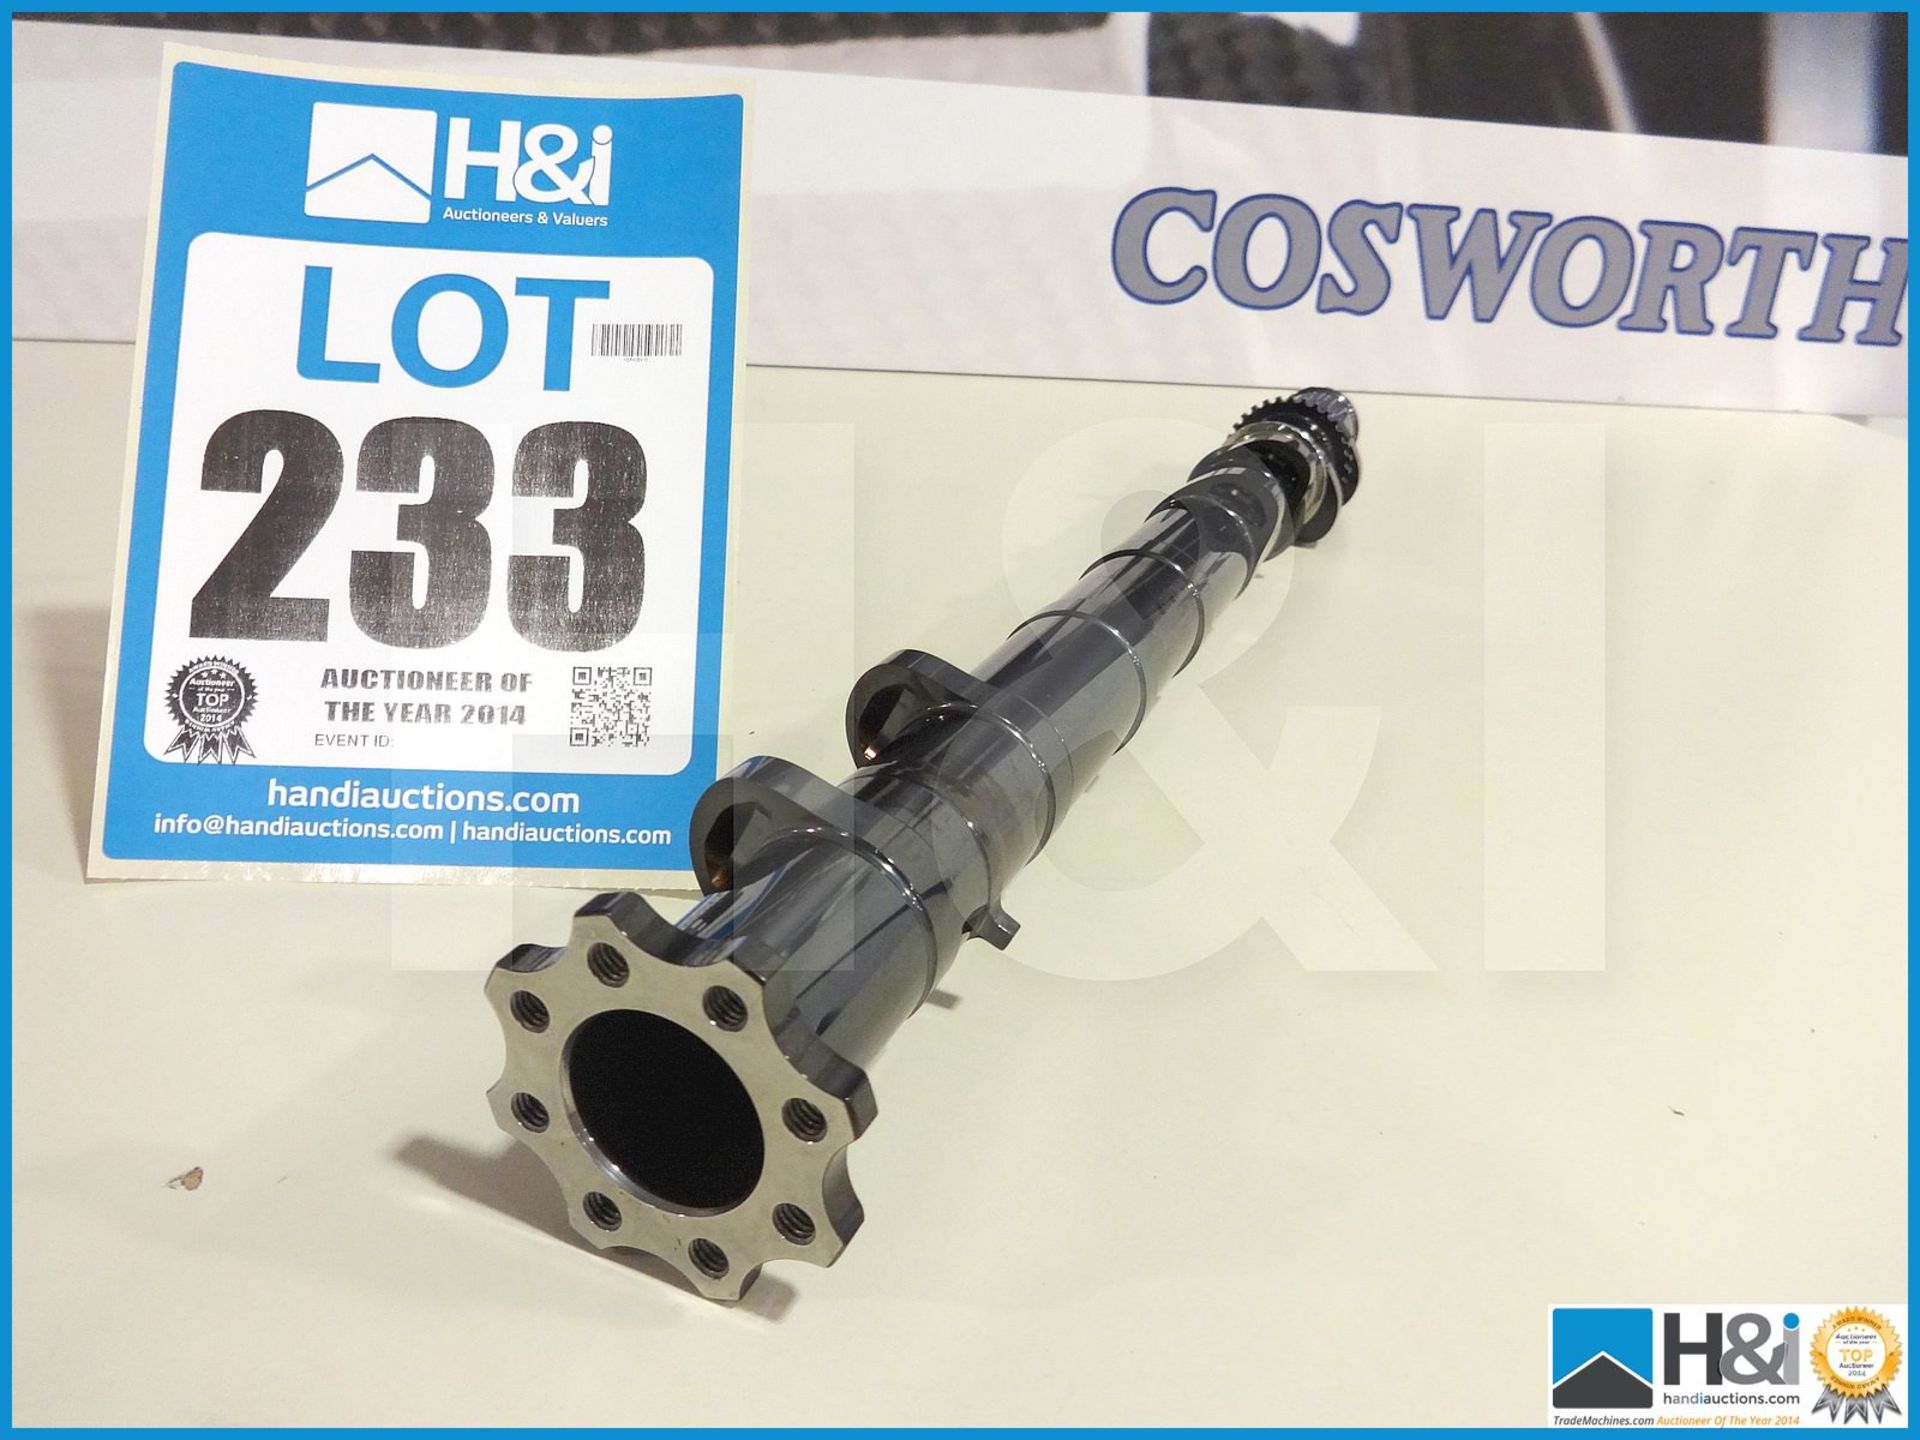 1 off Cosworth CA Formula One CA: CAMSHAFT EXHAUST RH - FINISHED DLC coated. MC: 20031296 CILN: 12